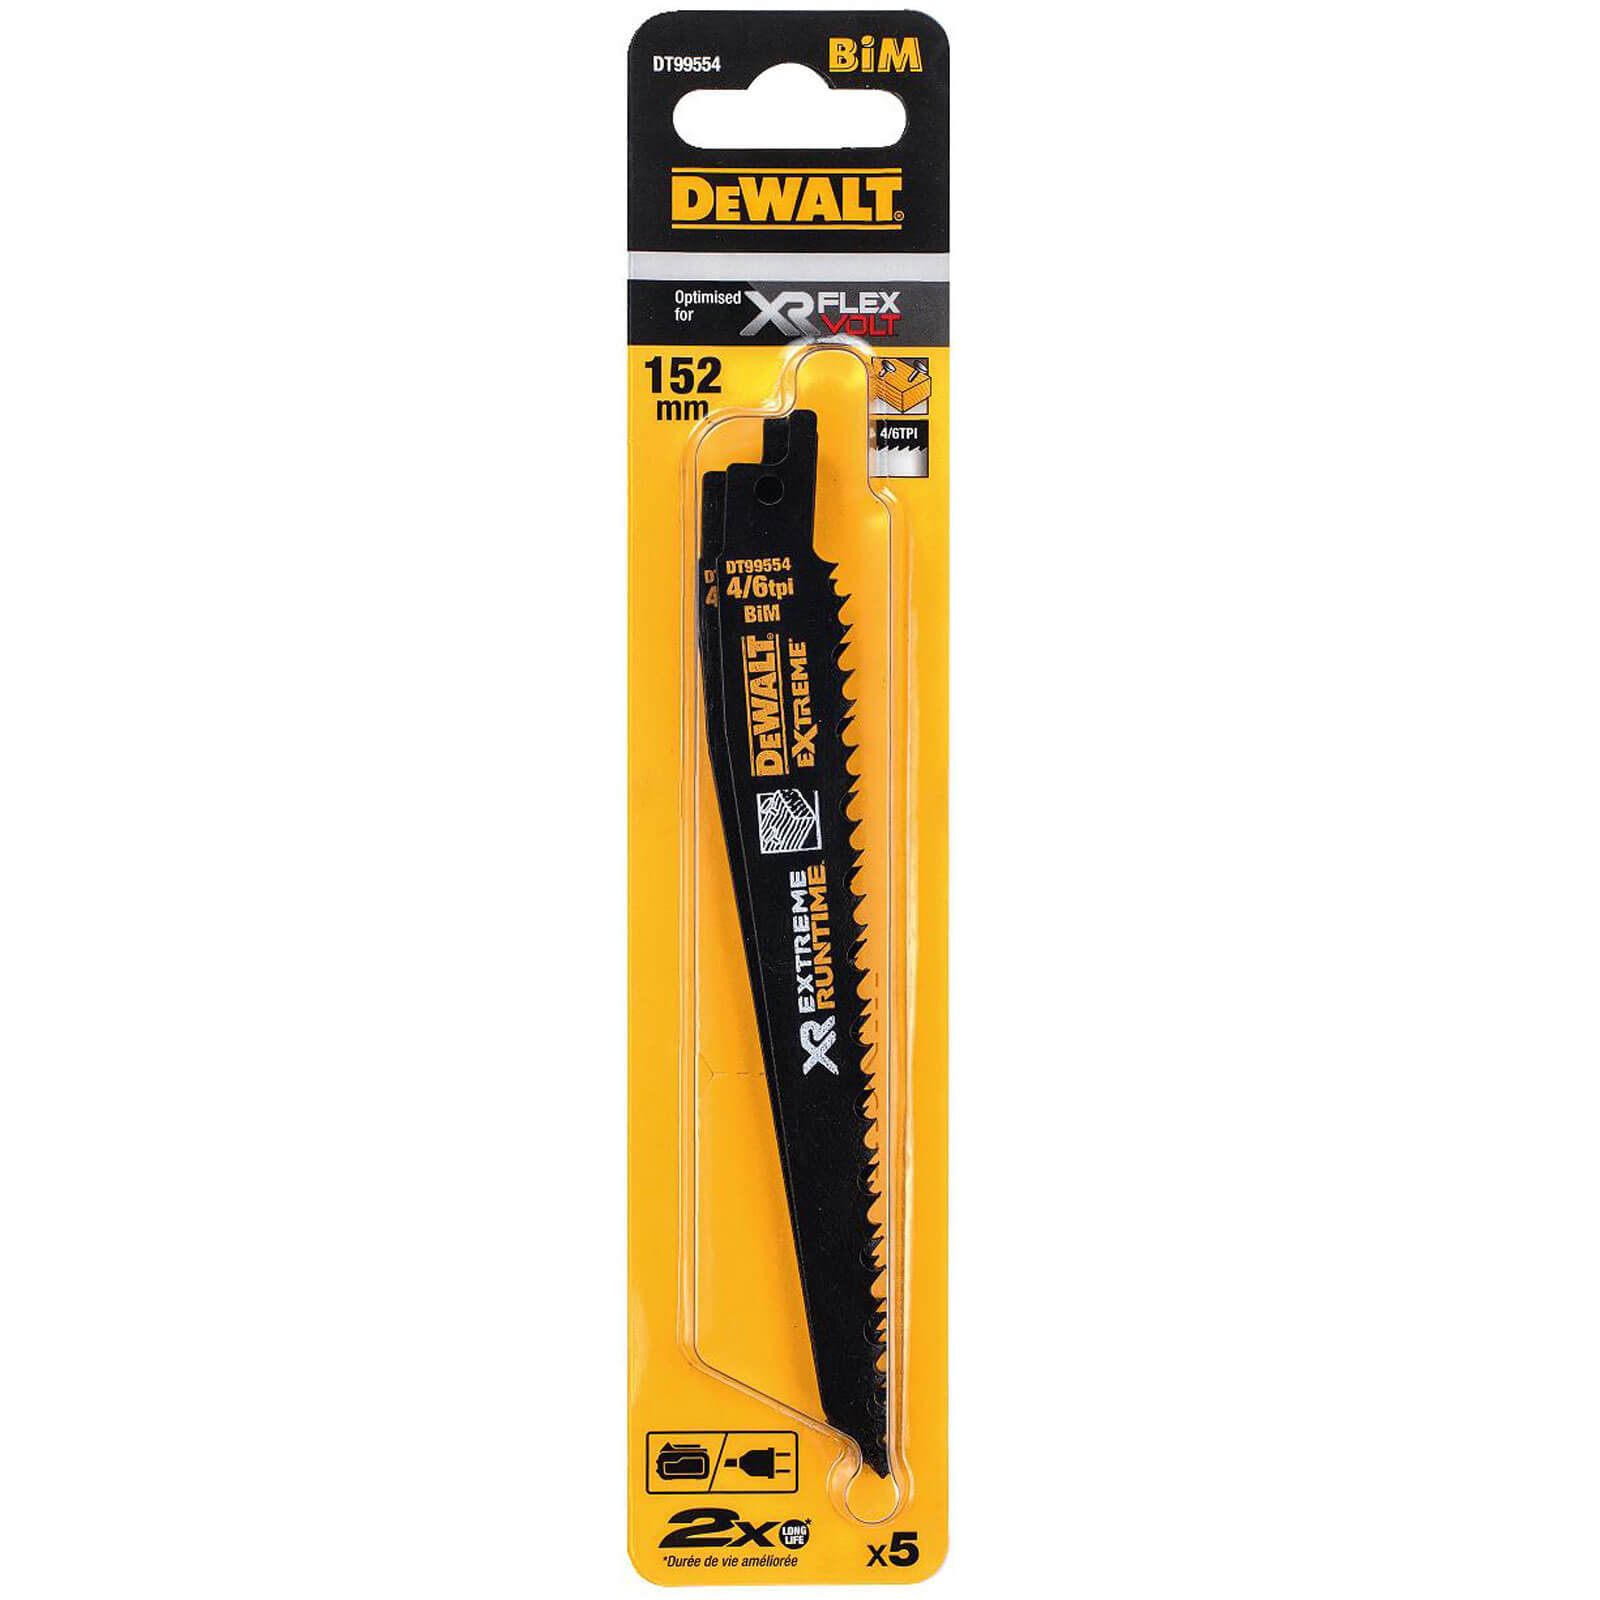 Image of DeWalt Extreme Runtime Wood Cutting Reciprocating Sabre Saw Blades 152mm Pack of 5